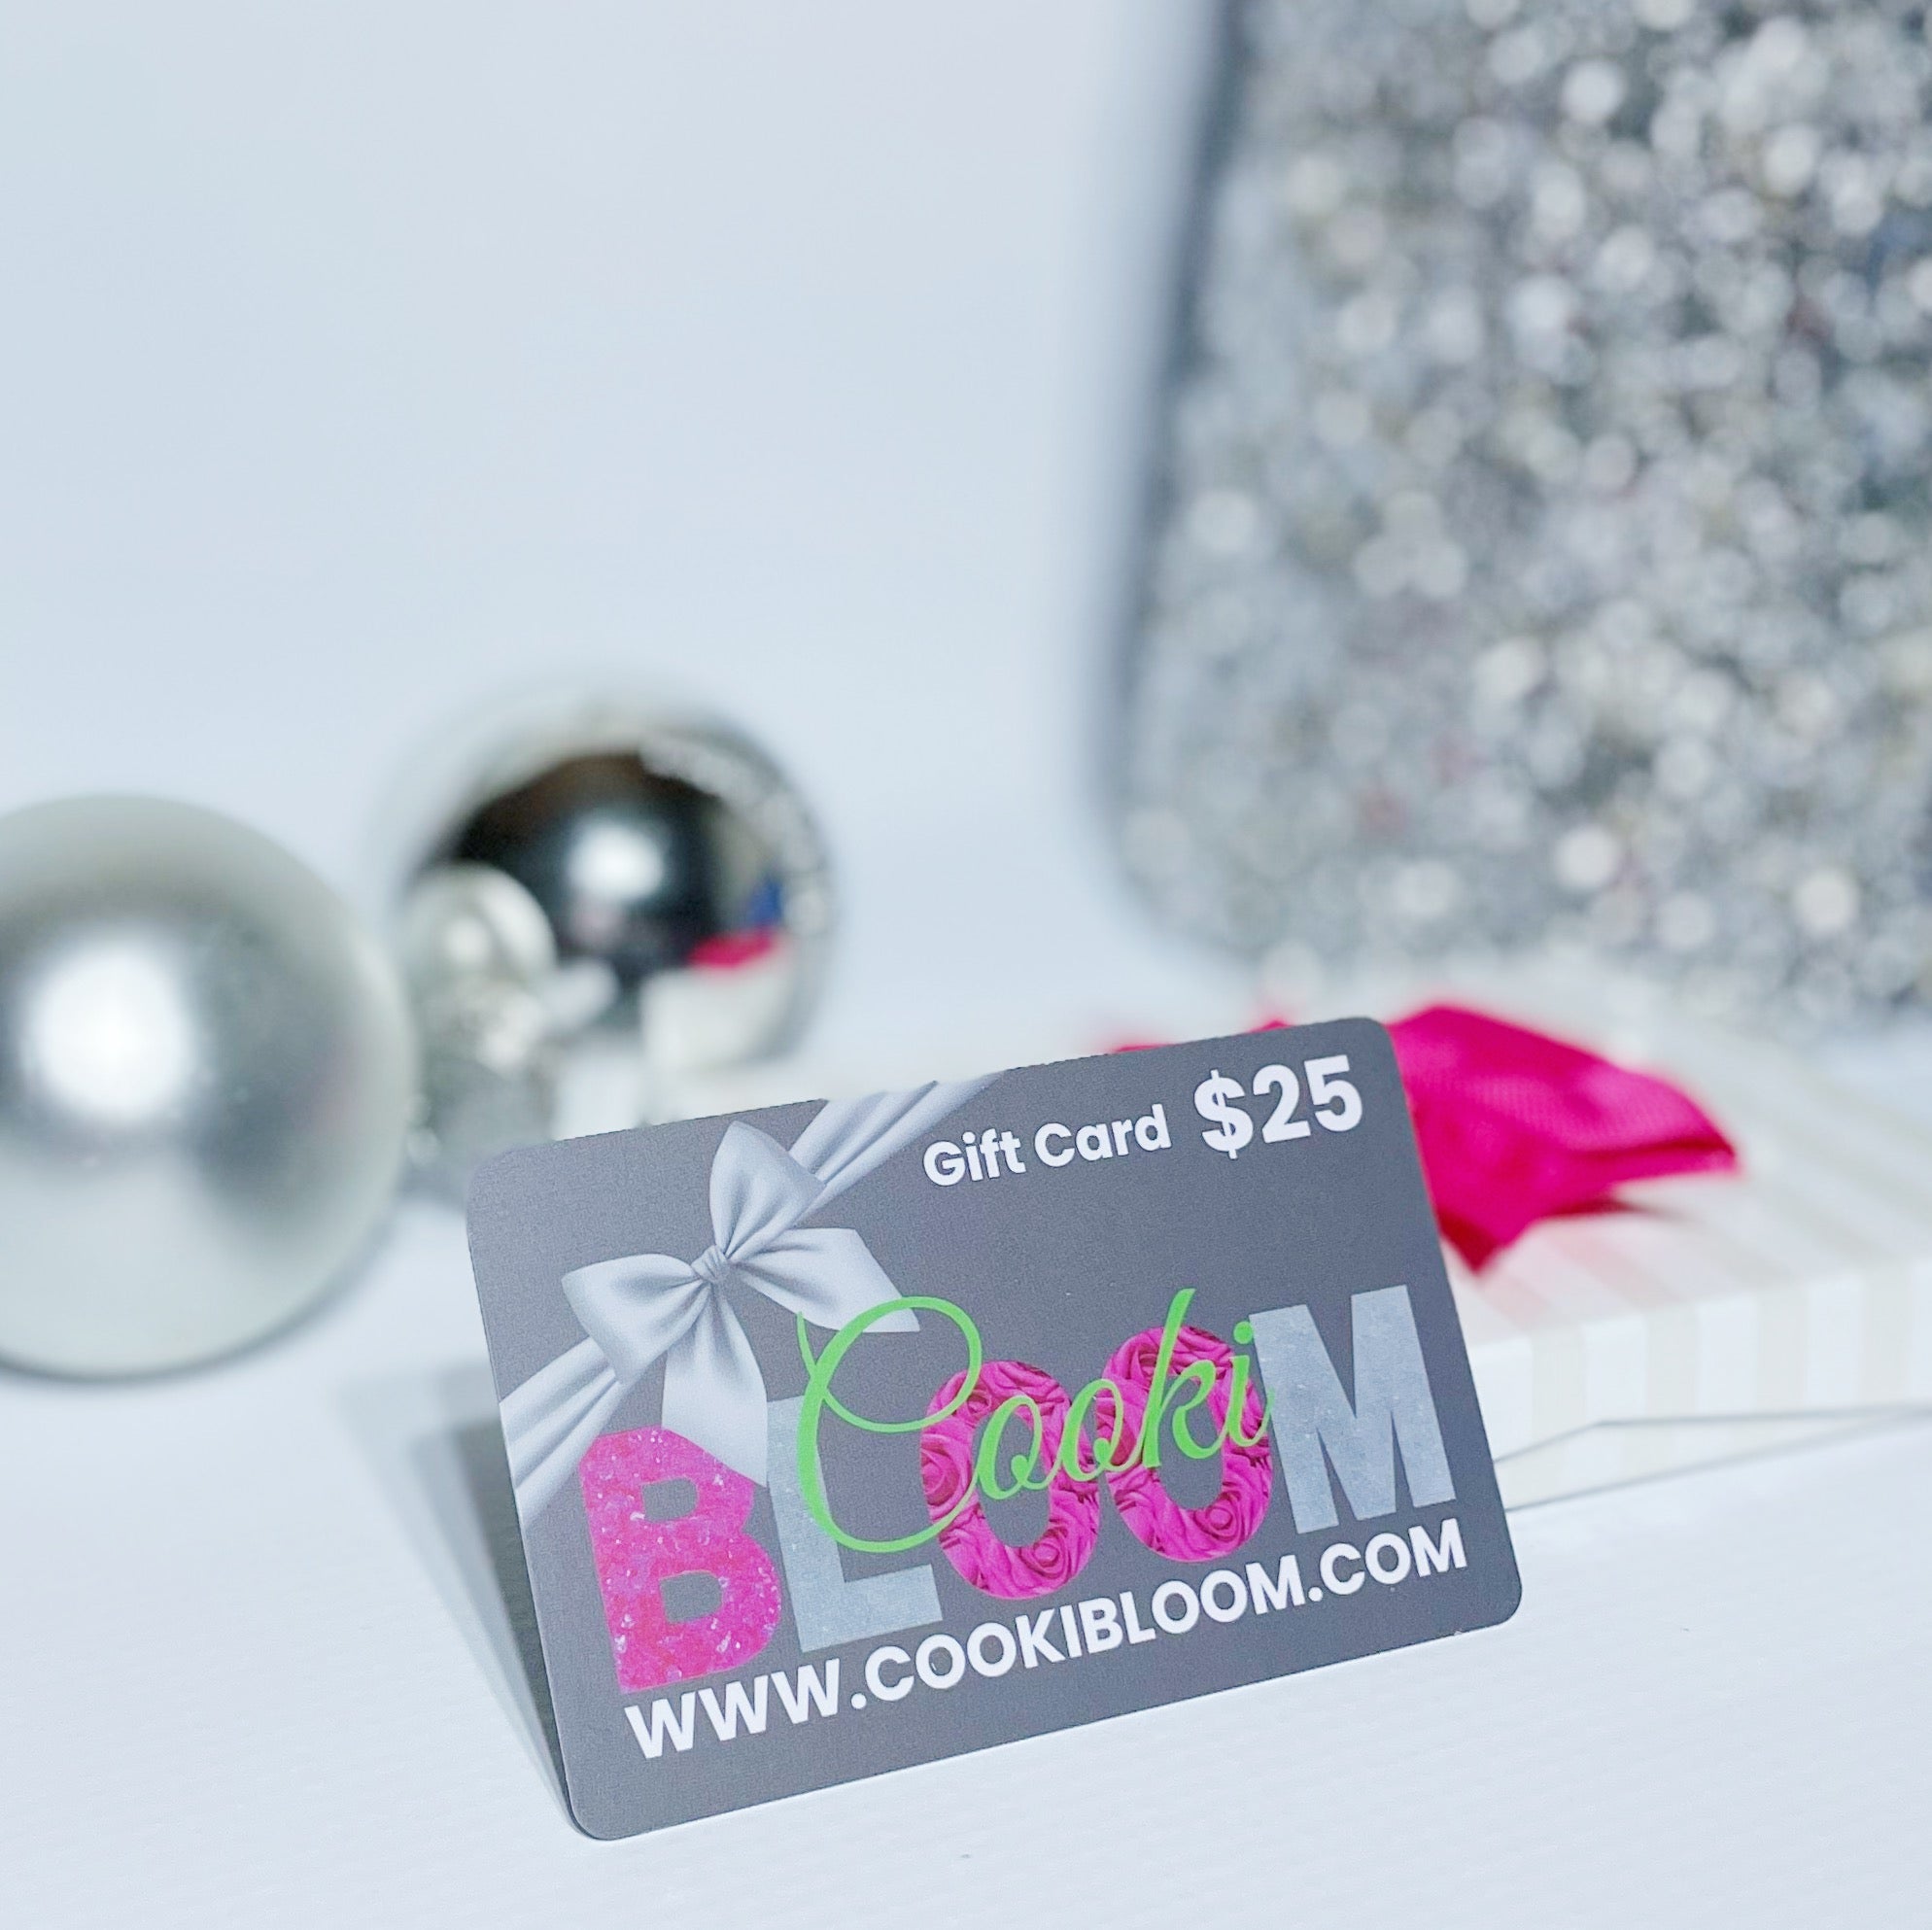 Cooki Bloom physical gift card with gift wrap